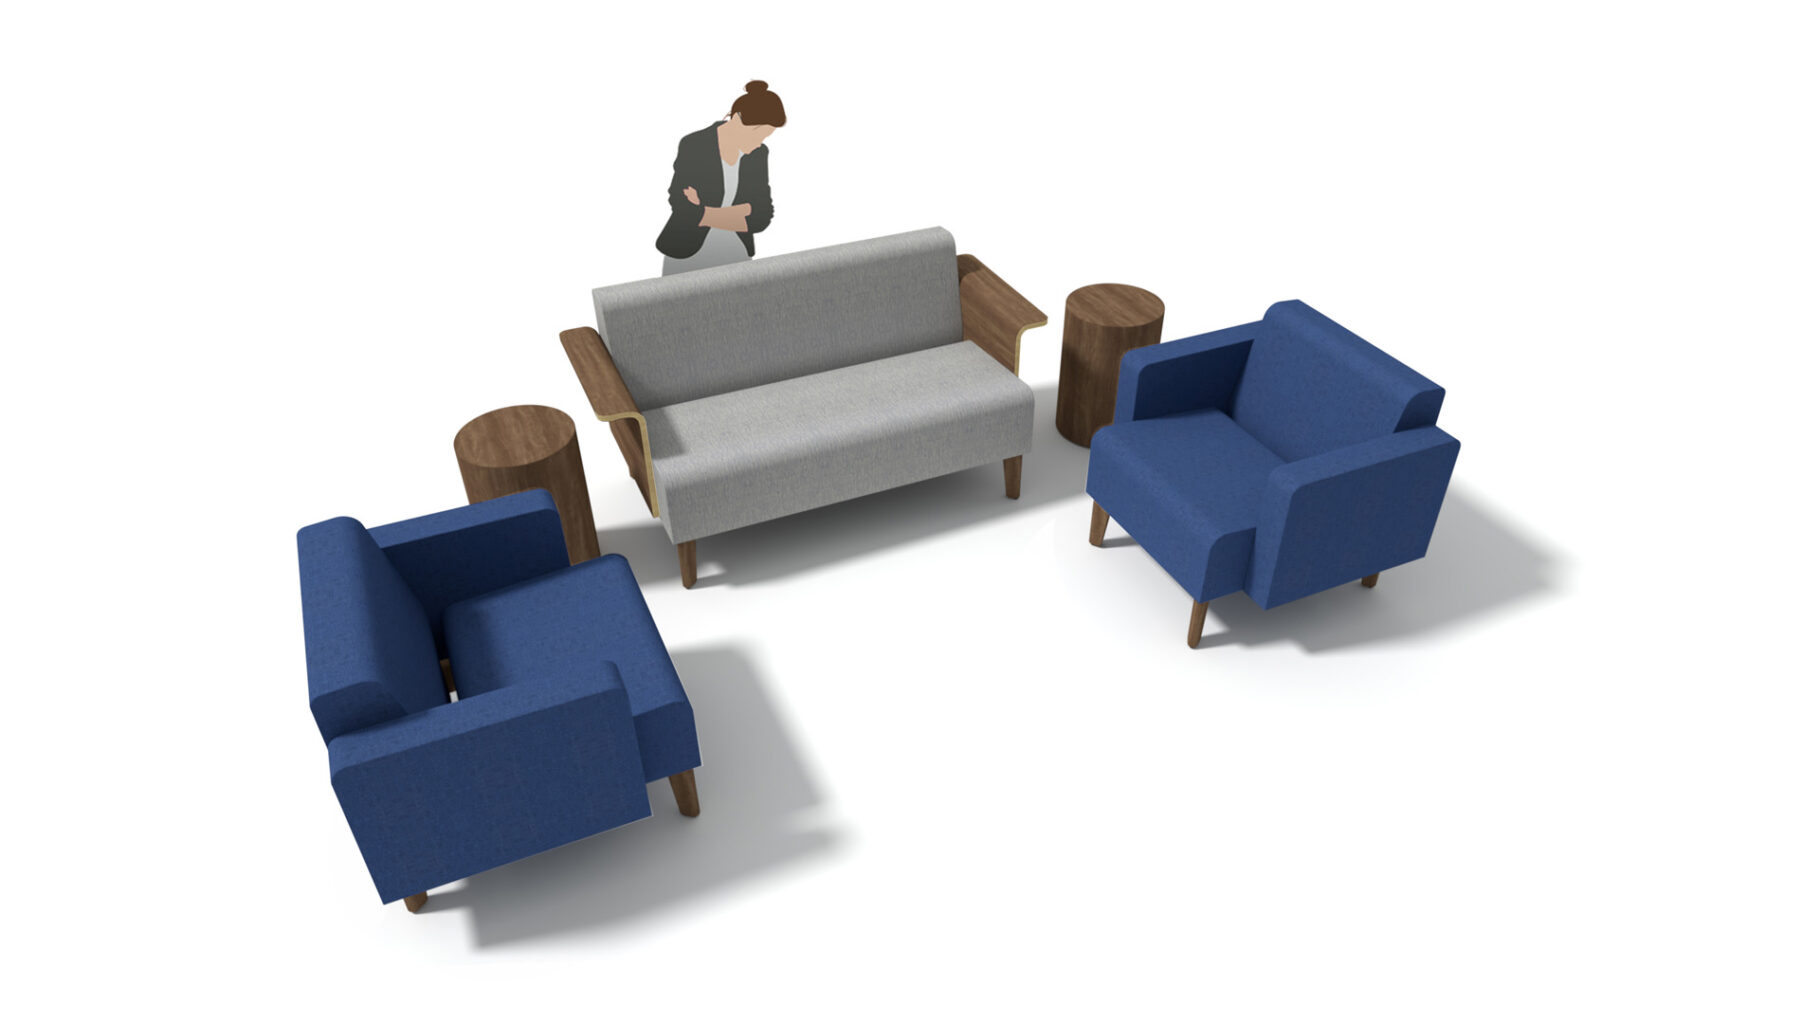 Concept A - Seating are with two Avila lounge chairs with upholstered arms, two Pilsen drum tables and and an Avila sofa with molded wood arms.